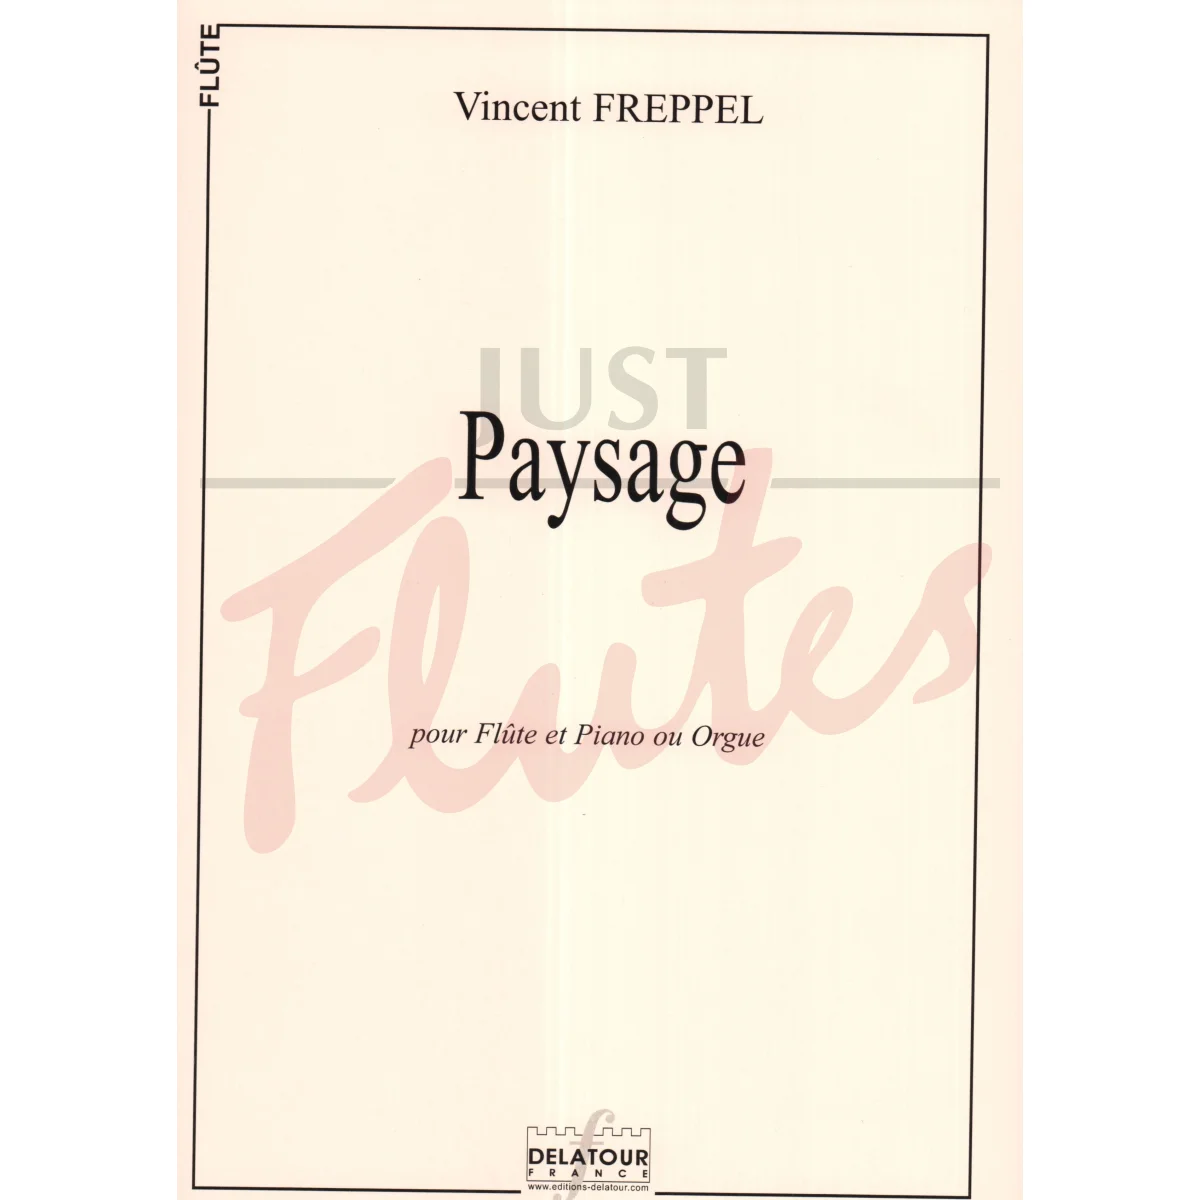 Paysage for Flute and Piano or Organ